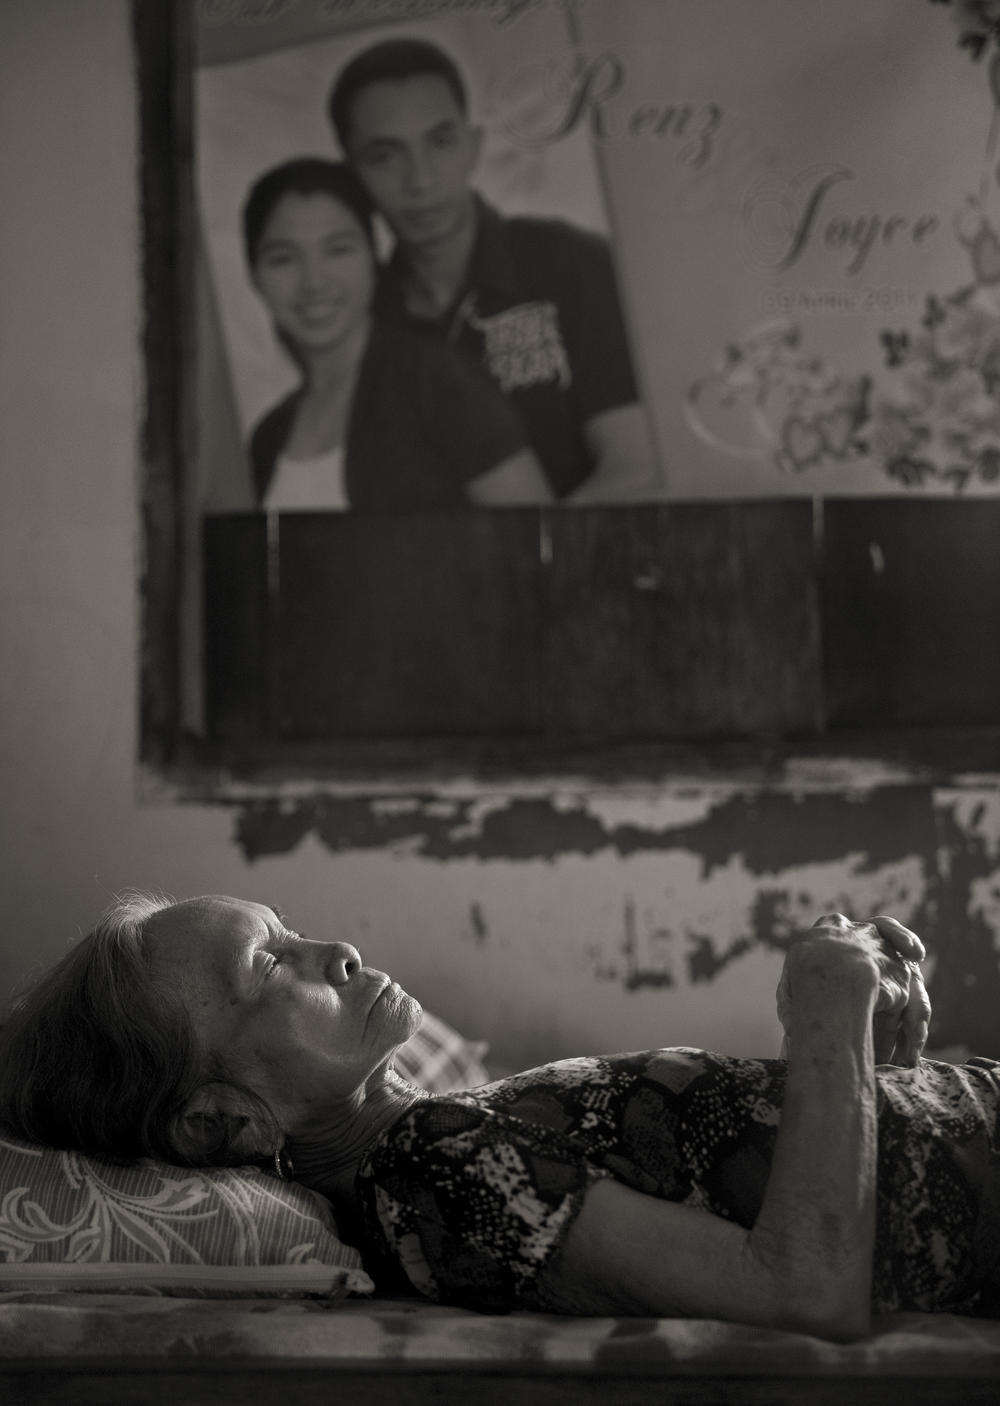 Januaria Galang Garcia takes a midday nap in the village of Mapaniqui in Pampanga, Philippines, on May 19, 2019. Garcia, who was one of the women subjected to sexual slavery during World War II, died on Sept. 3, 2021. She was 9 years old when the Japanese attacked their village, a suspected guerrilla holdout.